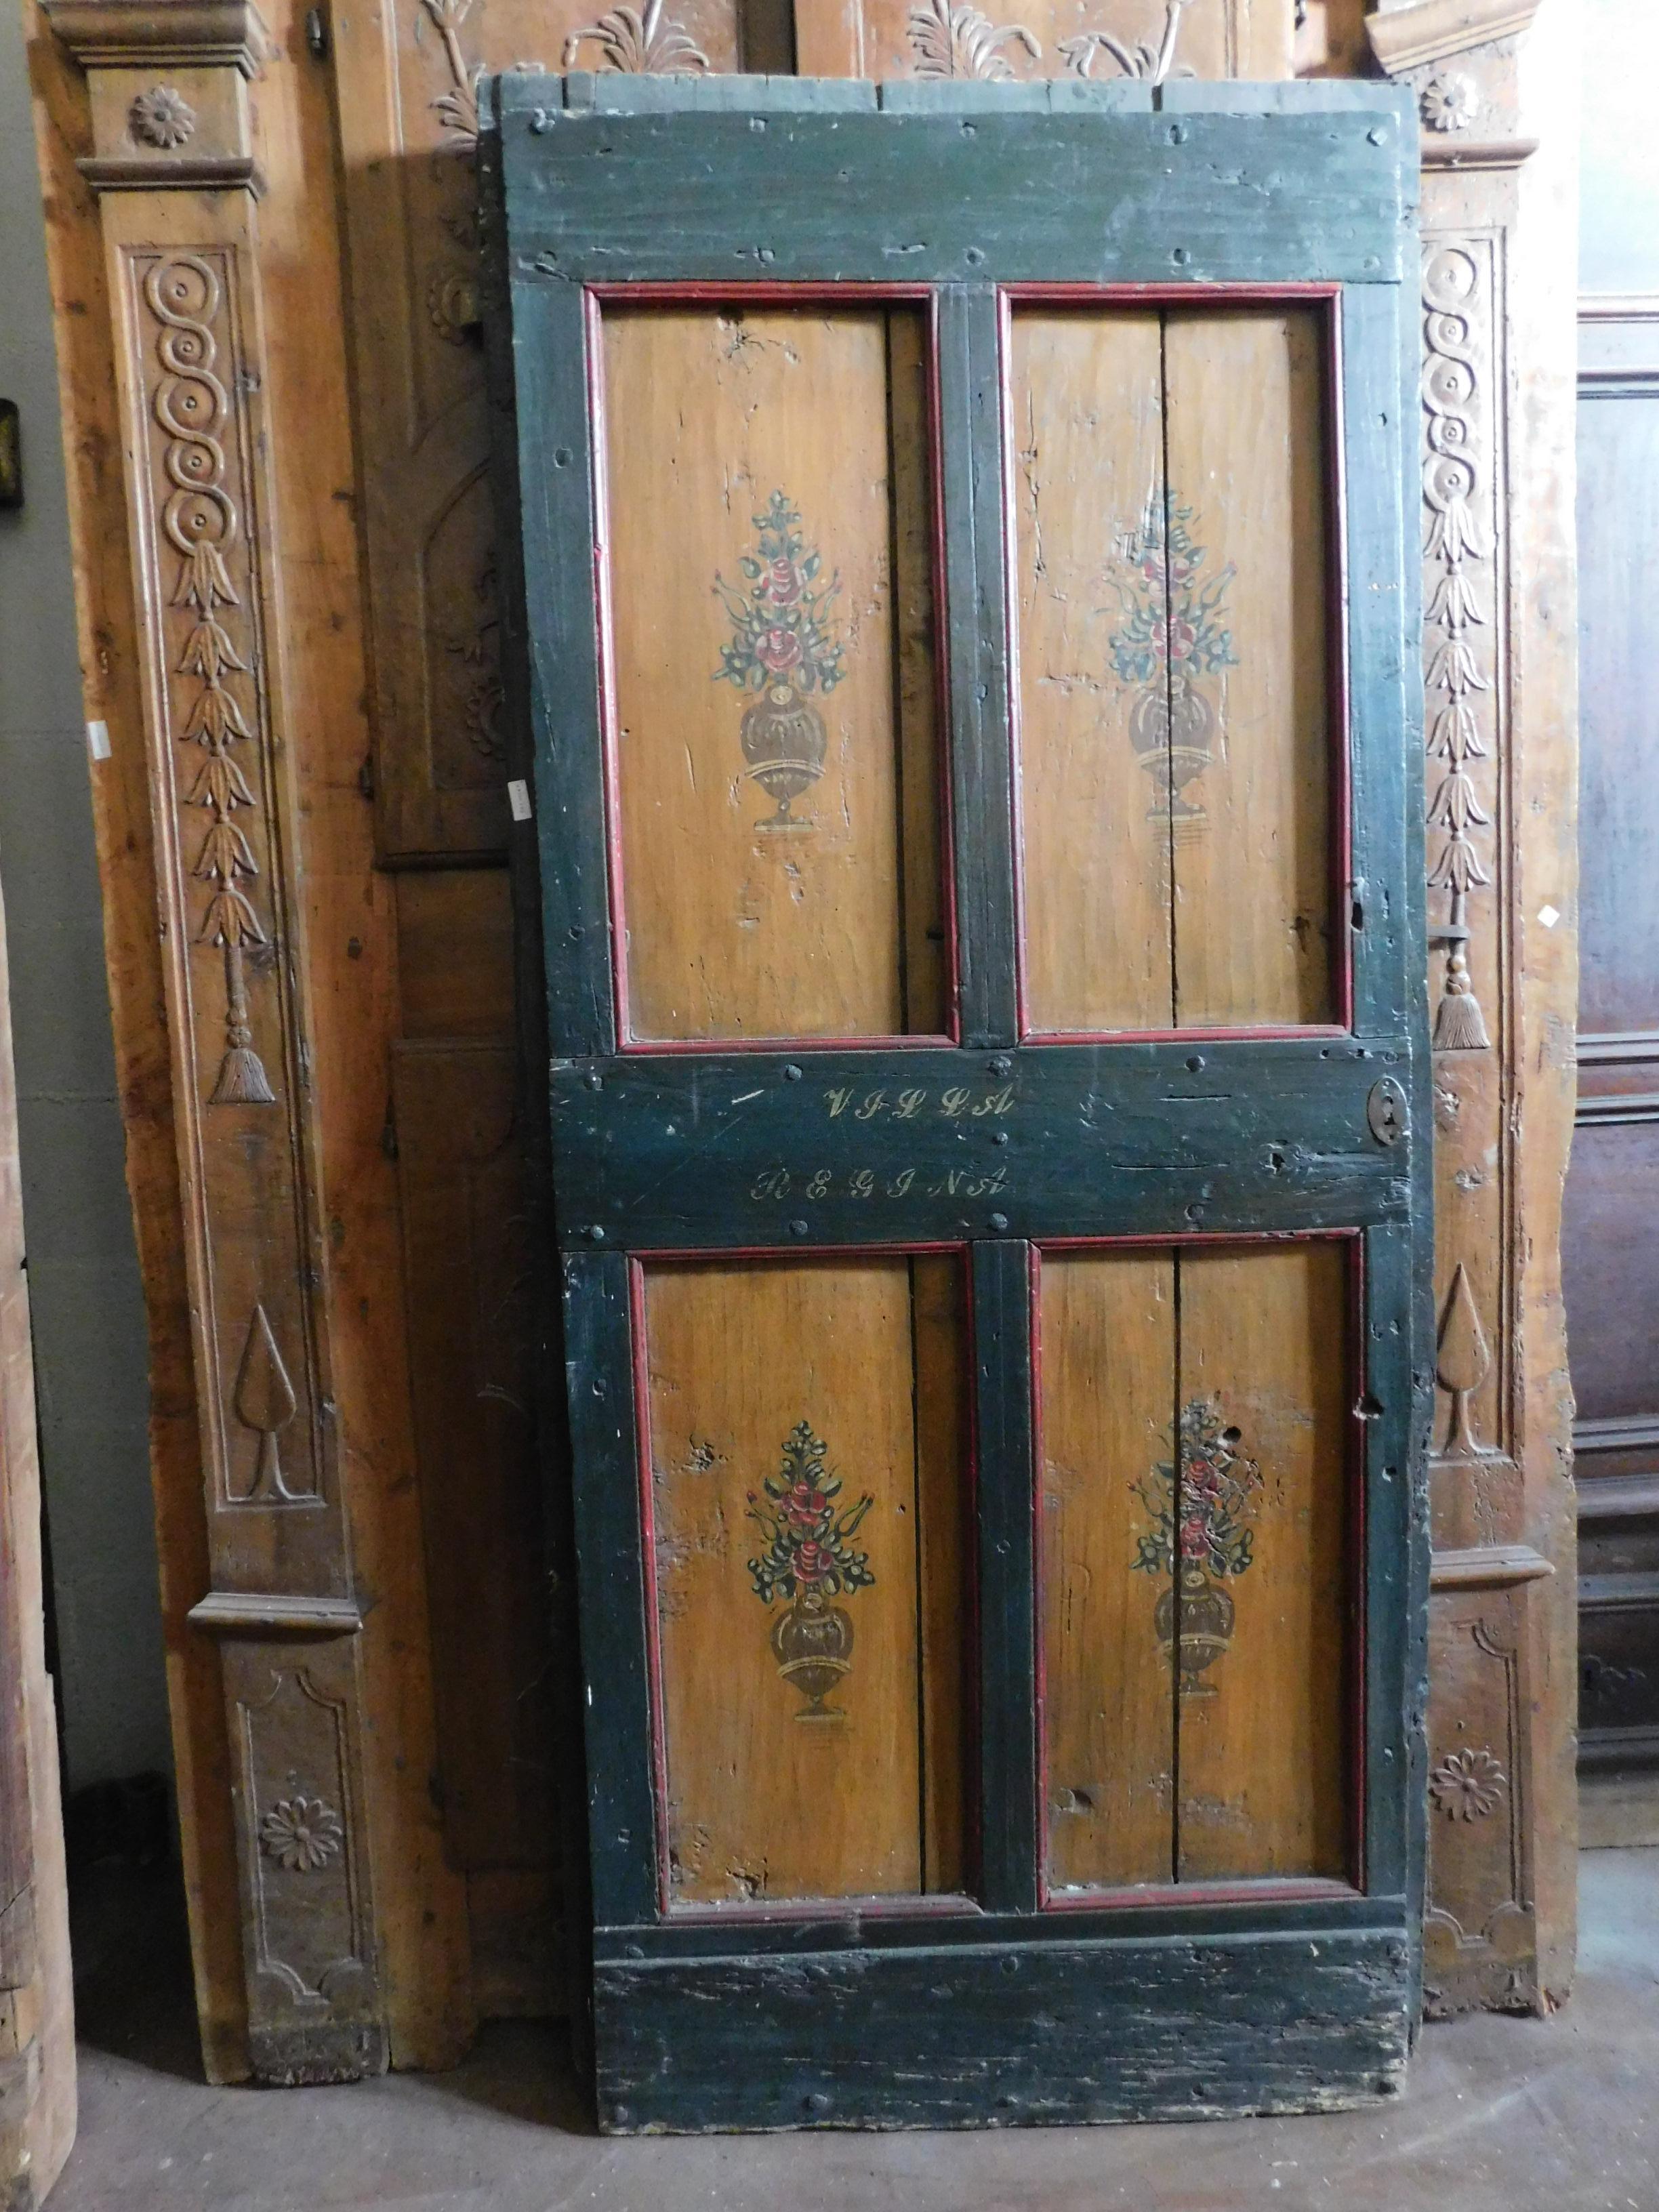 Antique rustic lacquered interior door, green background with red and yellow panels, smooth back, original iron hinges,
eighteenth century, from Italy, it has an inscription 